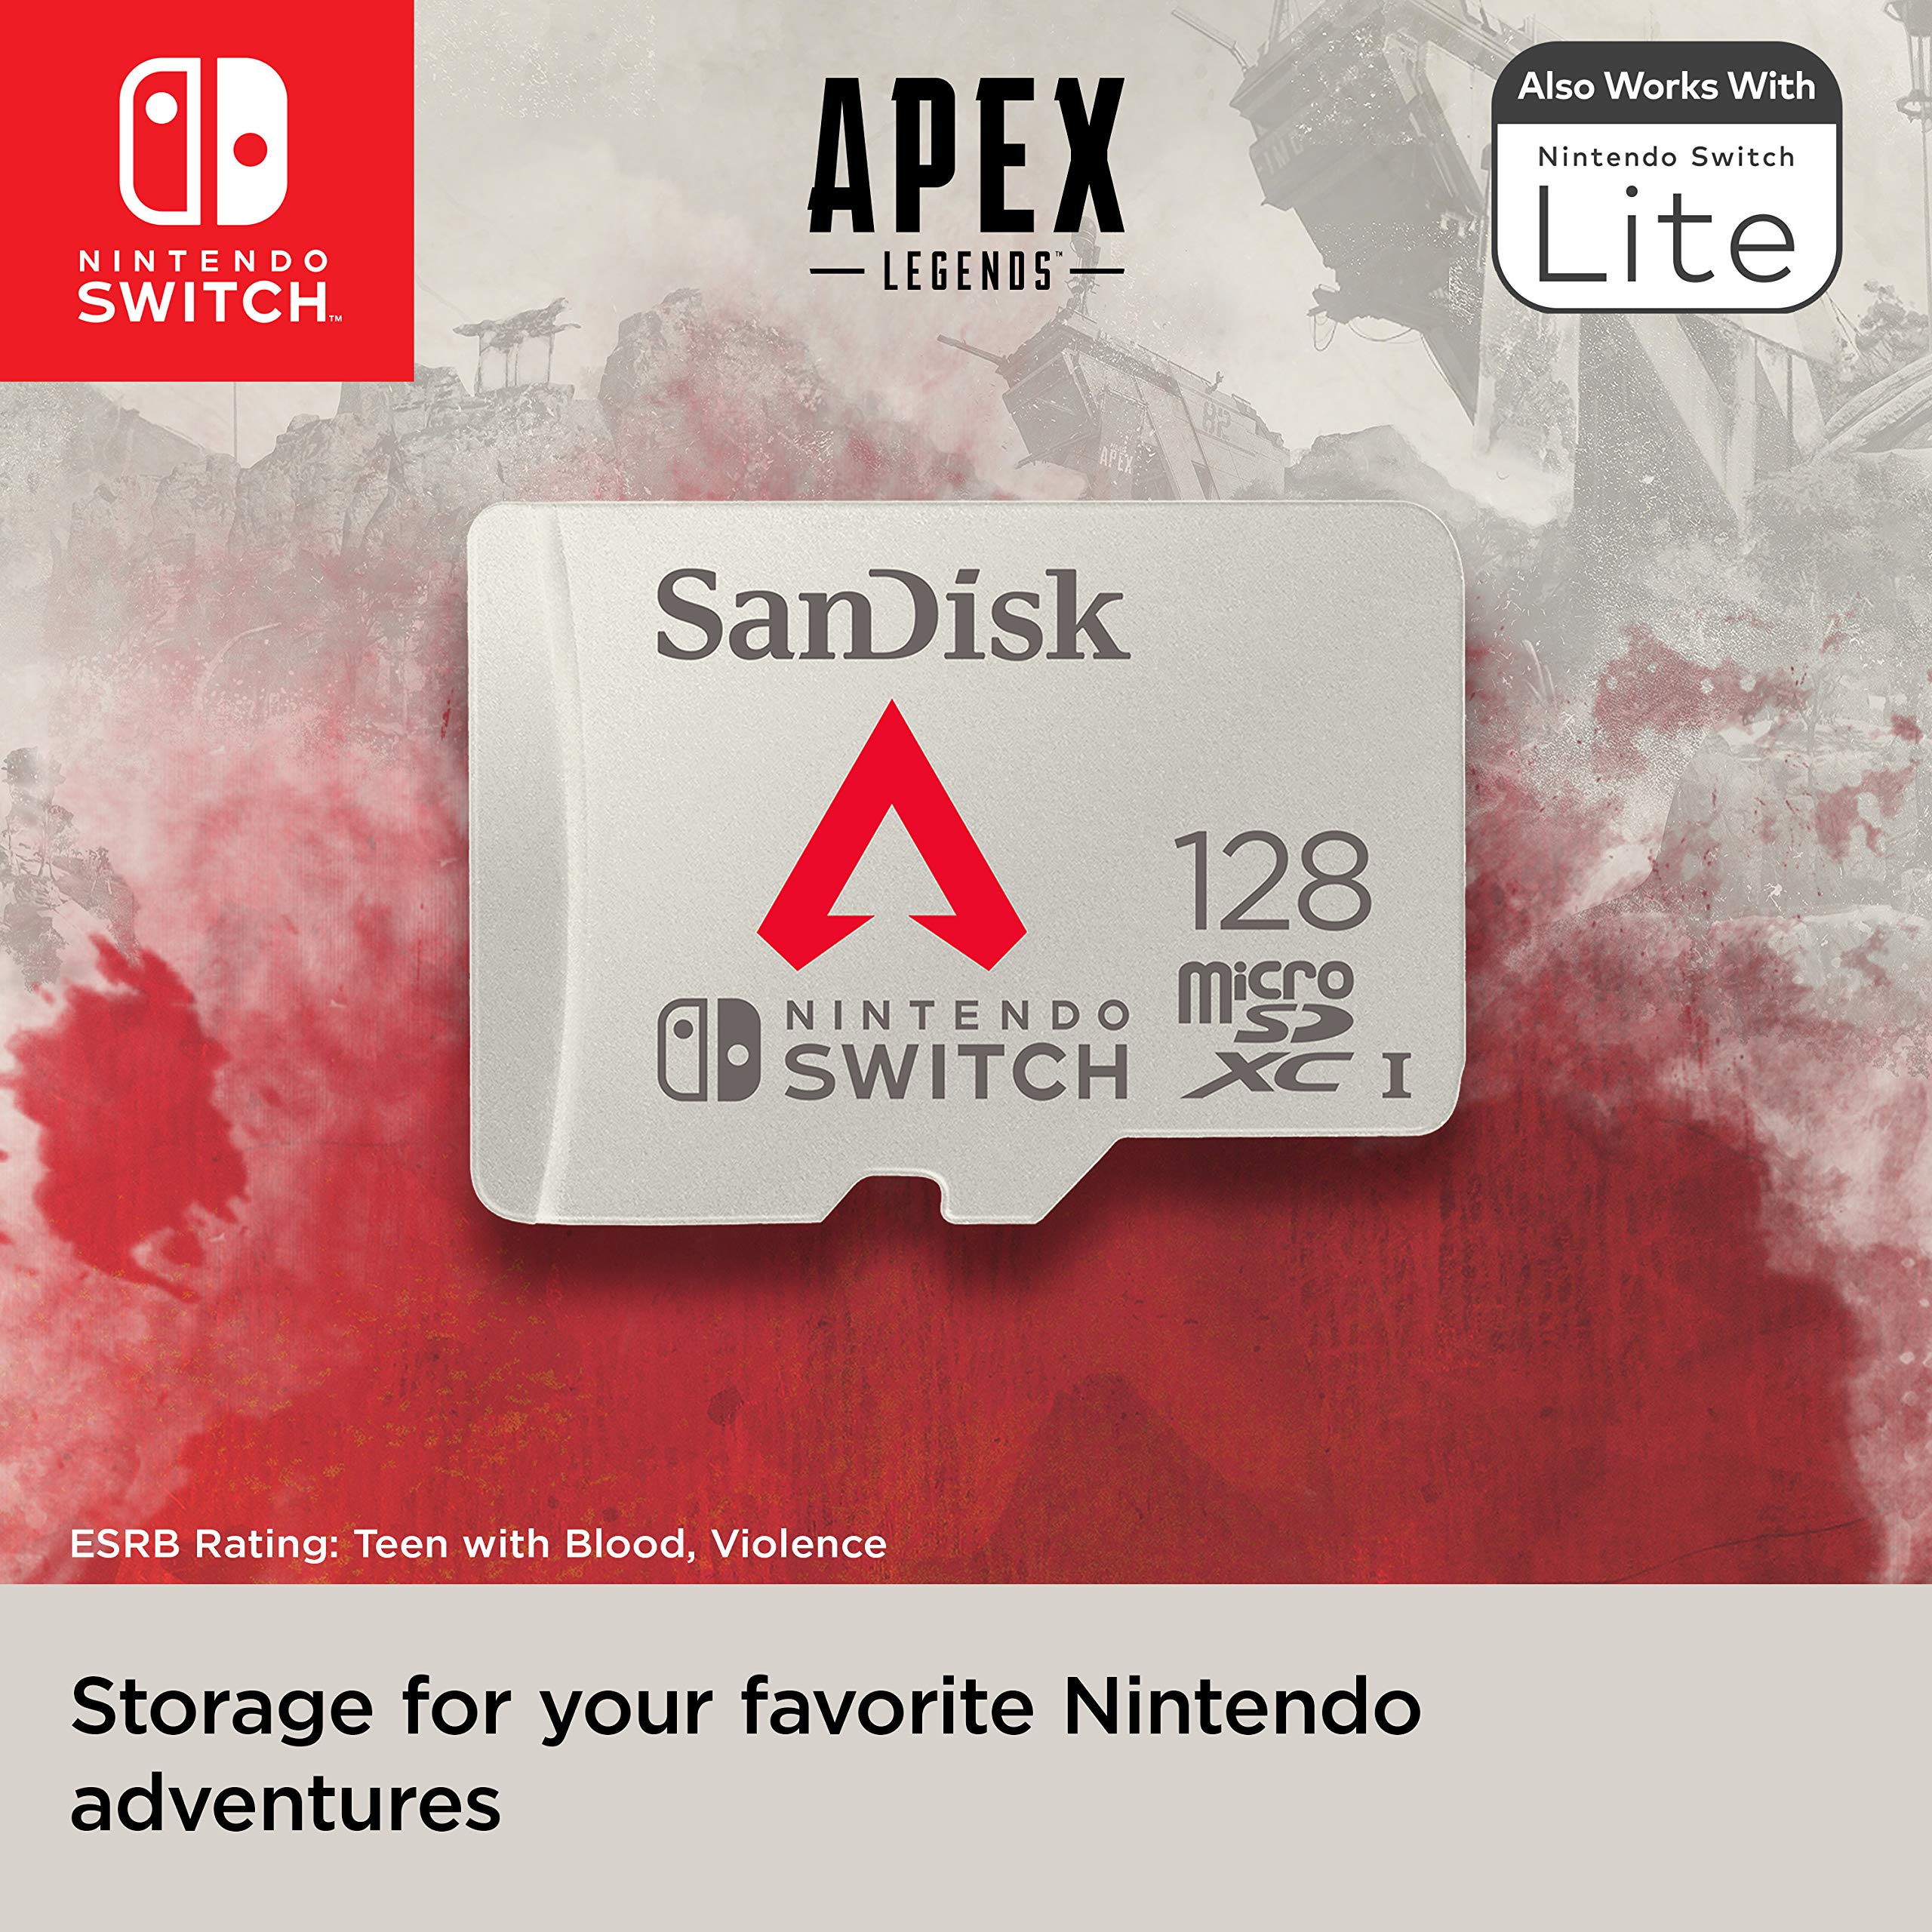 SanDisk 128GB microSDXC Card Licensed for Nintendo Switch, Apex Legends Edition - SDSQXAO-128G-GN6ZY